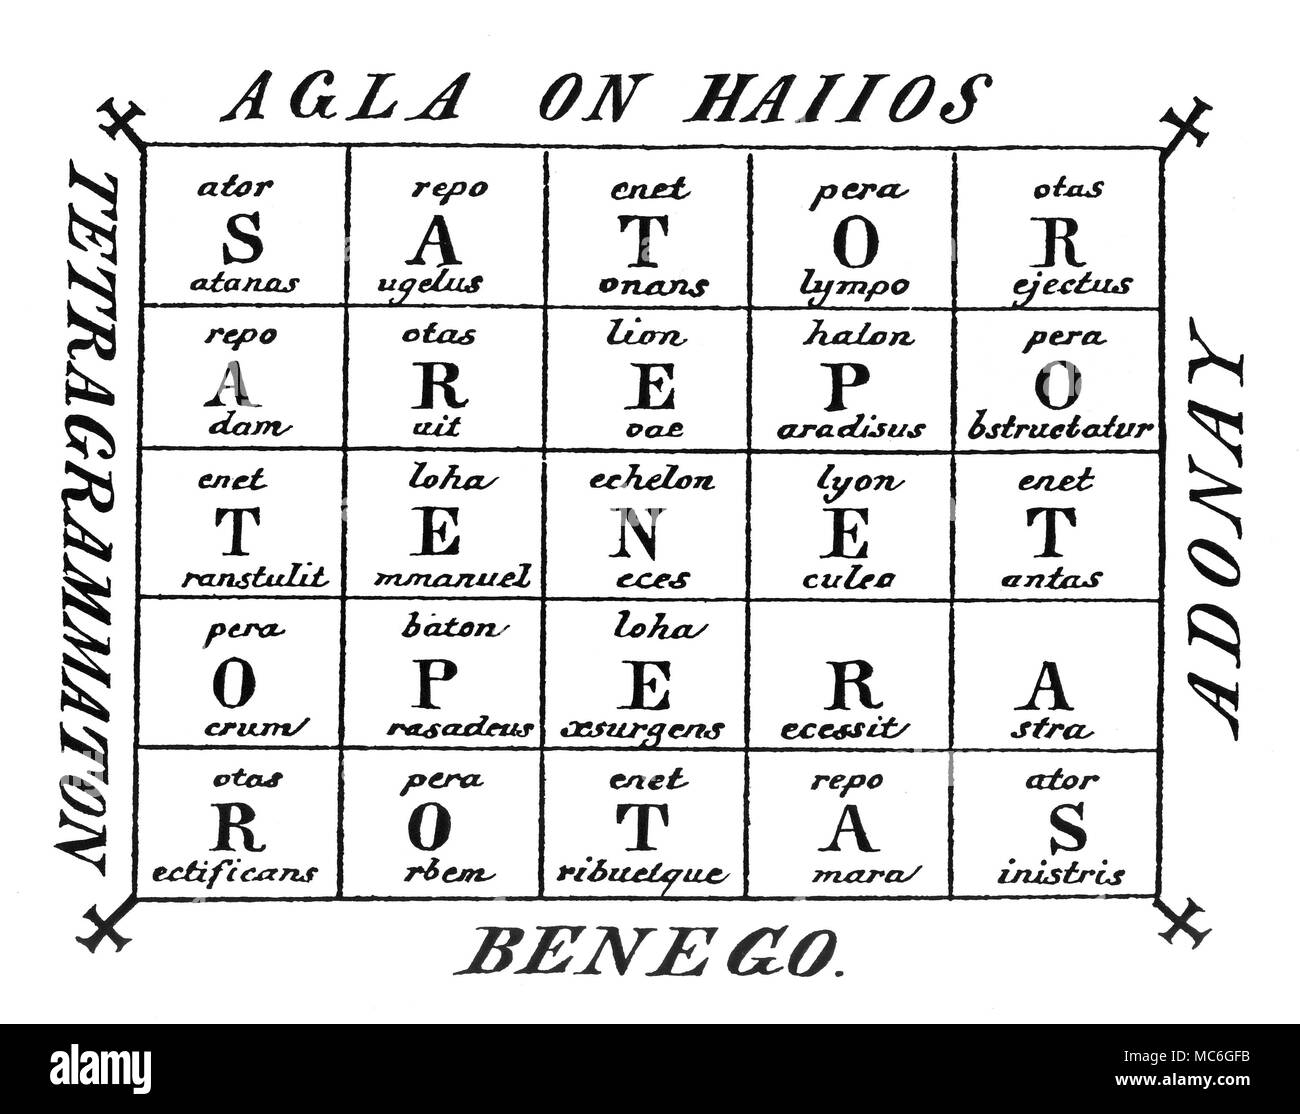 magic-symbols-arepo-rotas-agla-engraving-of-the-5x5-magic-square-in-which-the-formula-sator-arepo-tenet-opera-rotas-is-read-vertically-and-horizontally-this-formula-was-certainly-used-in-ancient-roman-times-as-a-latin-charm-the-meaning-is-not-altogether-clear-but-it-may-be-translated-as-arepo-the-sower-holds-the-wheel-at-work-in-this-particular-charm-which-is-from-schiebles-faustbuch-of-1863-there-is-within-the-individual-squares-is-a-play-on-various-magical-religious-and-demonic-names-relating-to-the-particular-capital-letter-for-example-top-left-s-repeats-sator-MC6GFB.jpg